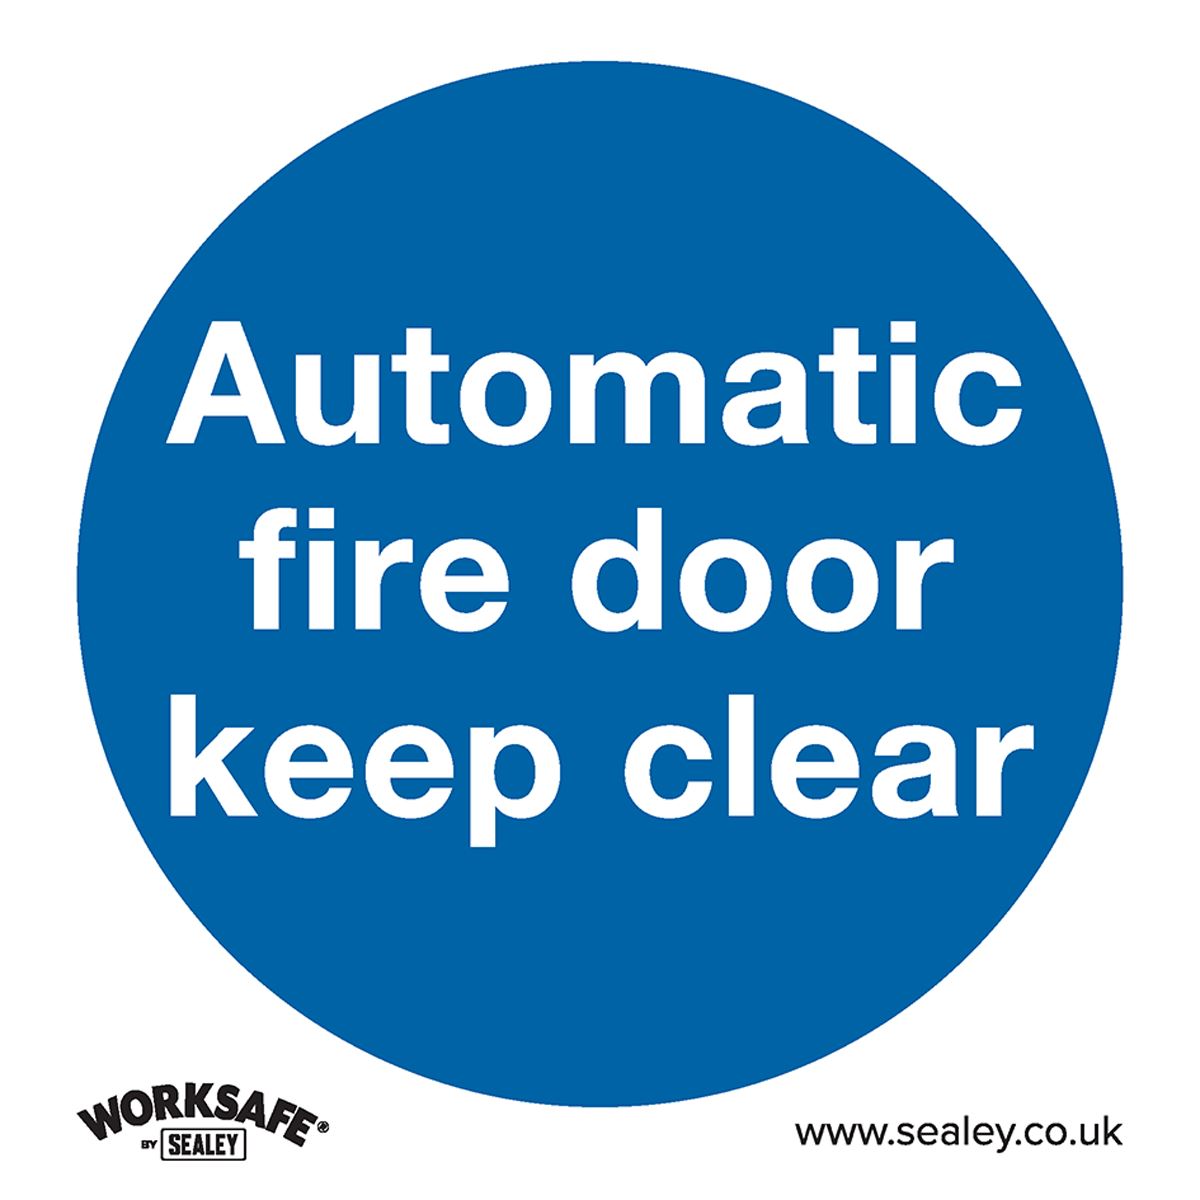 Worksafe by Sealey Mandatory Safety Sign - Automatic Fire Door Keep Clear - Self-Adhesive Vinyl